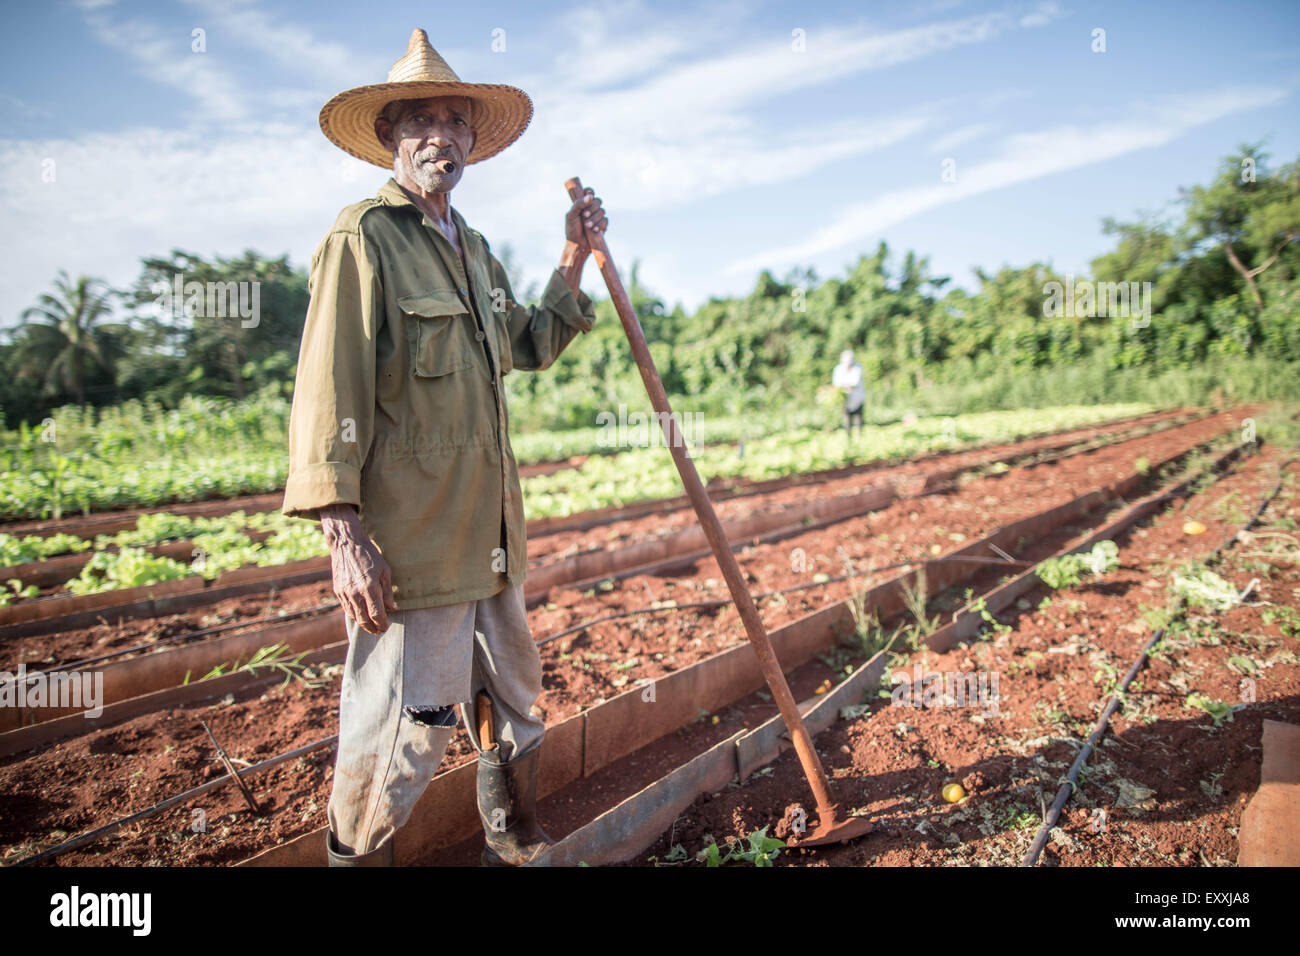 Havana, Cuba. 17th July, 2015. A farm worker stands on a field of the urban agriculture project 'Vivero Alamar' funded by the Deutsche Welthungerhilfe (German Agro Action) in Havana, Cuba, 17 July 2015. Frank-Walter Steinmeier is the first German Foreign Minister to visit Cuba. PHOTO: MICHAEL KAPPELER/dpa/Alamy Live News Stock Photo